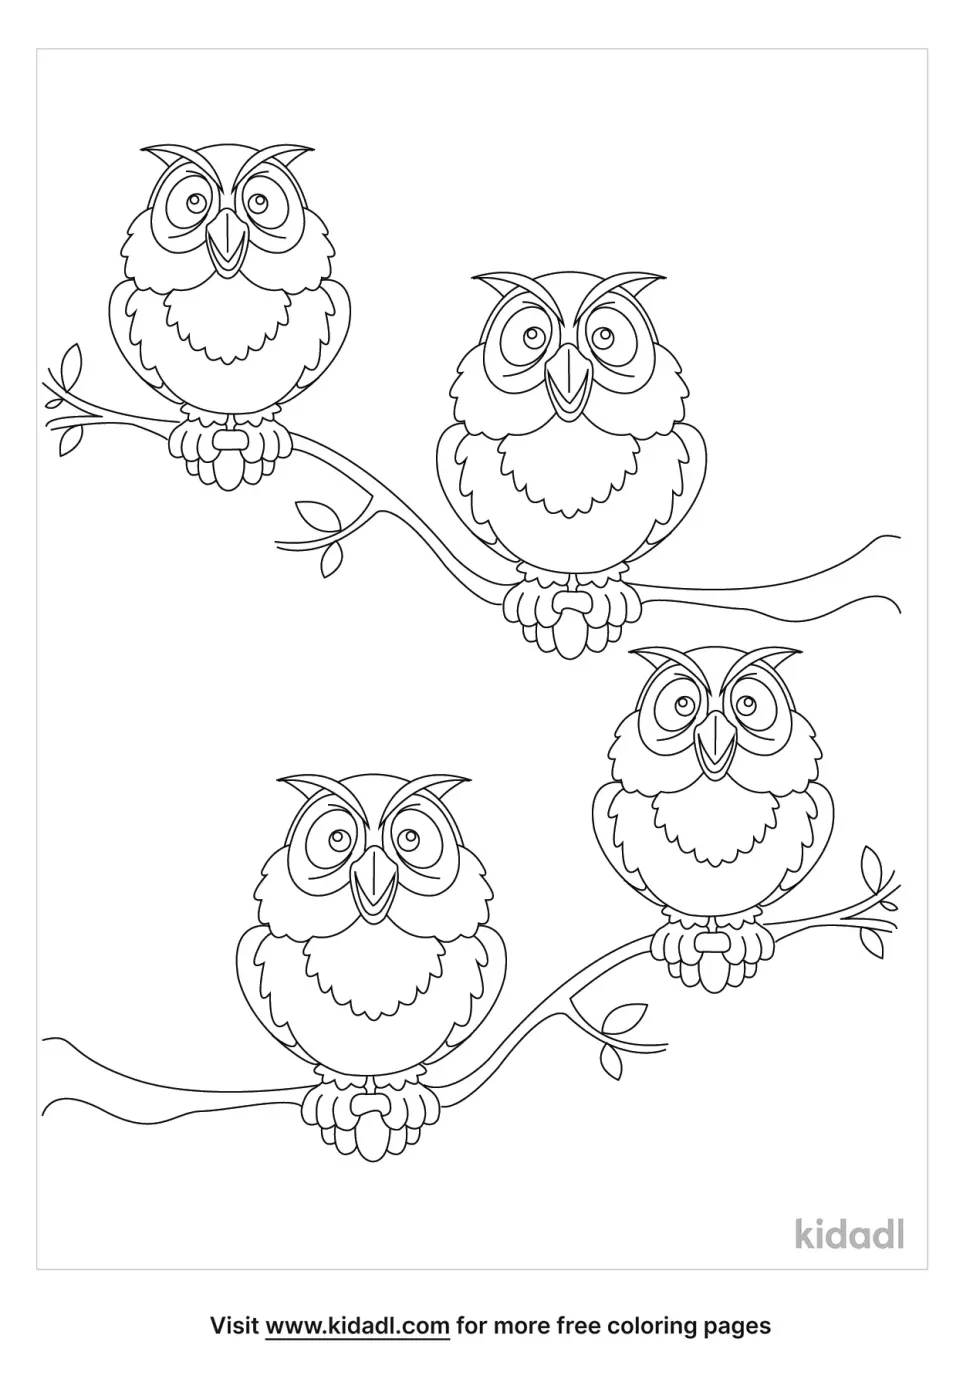 Owl Group Coloring Page